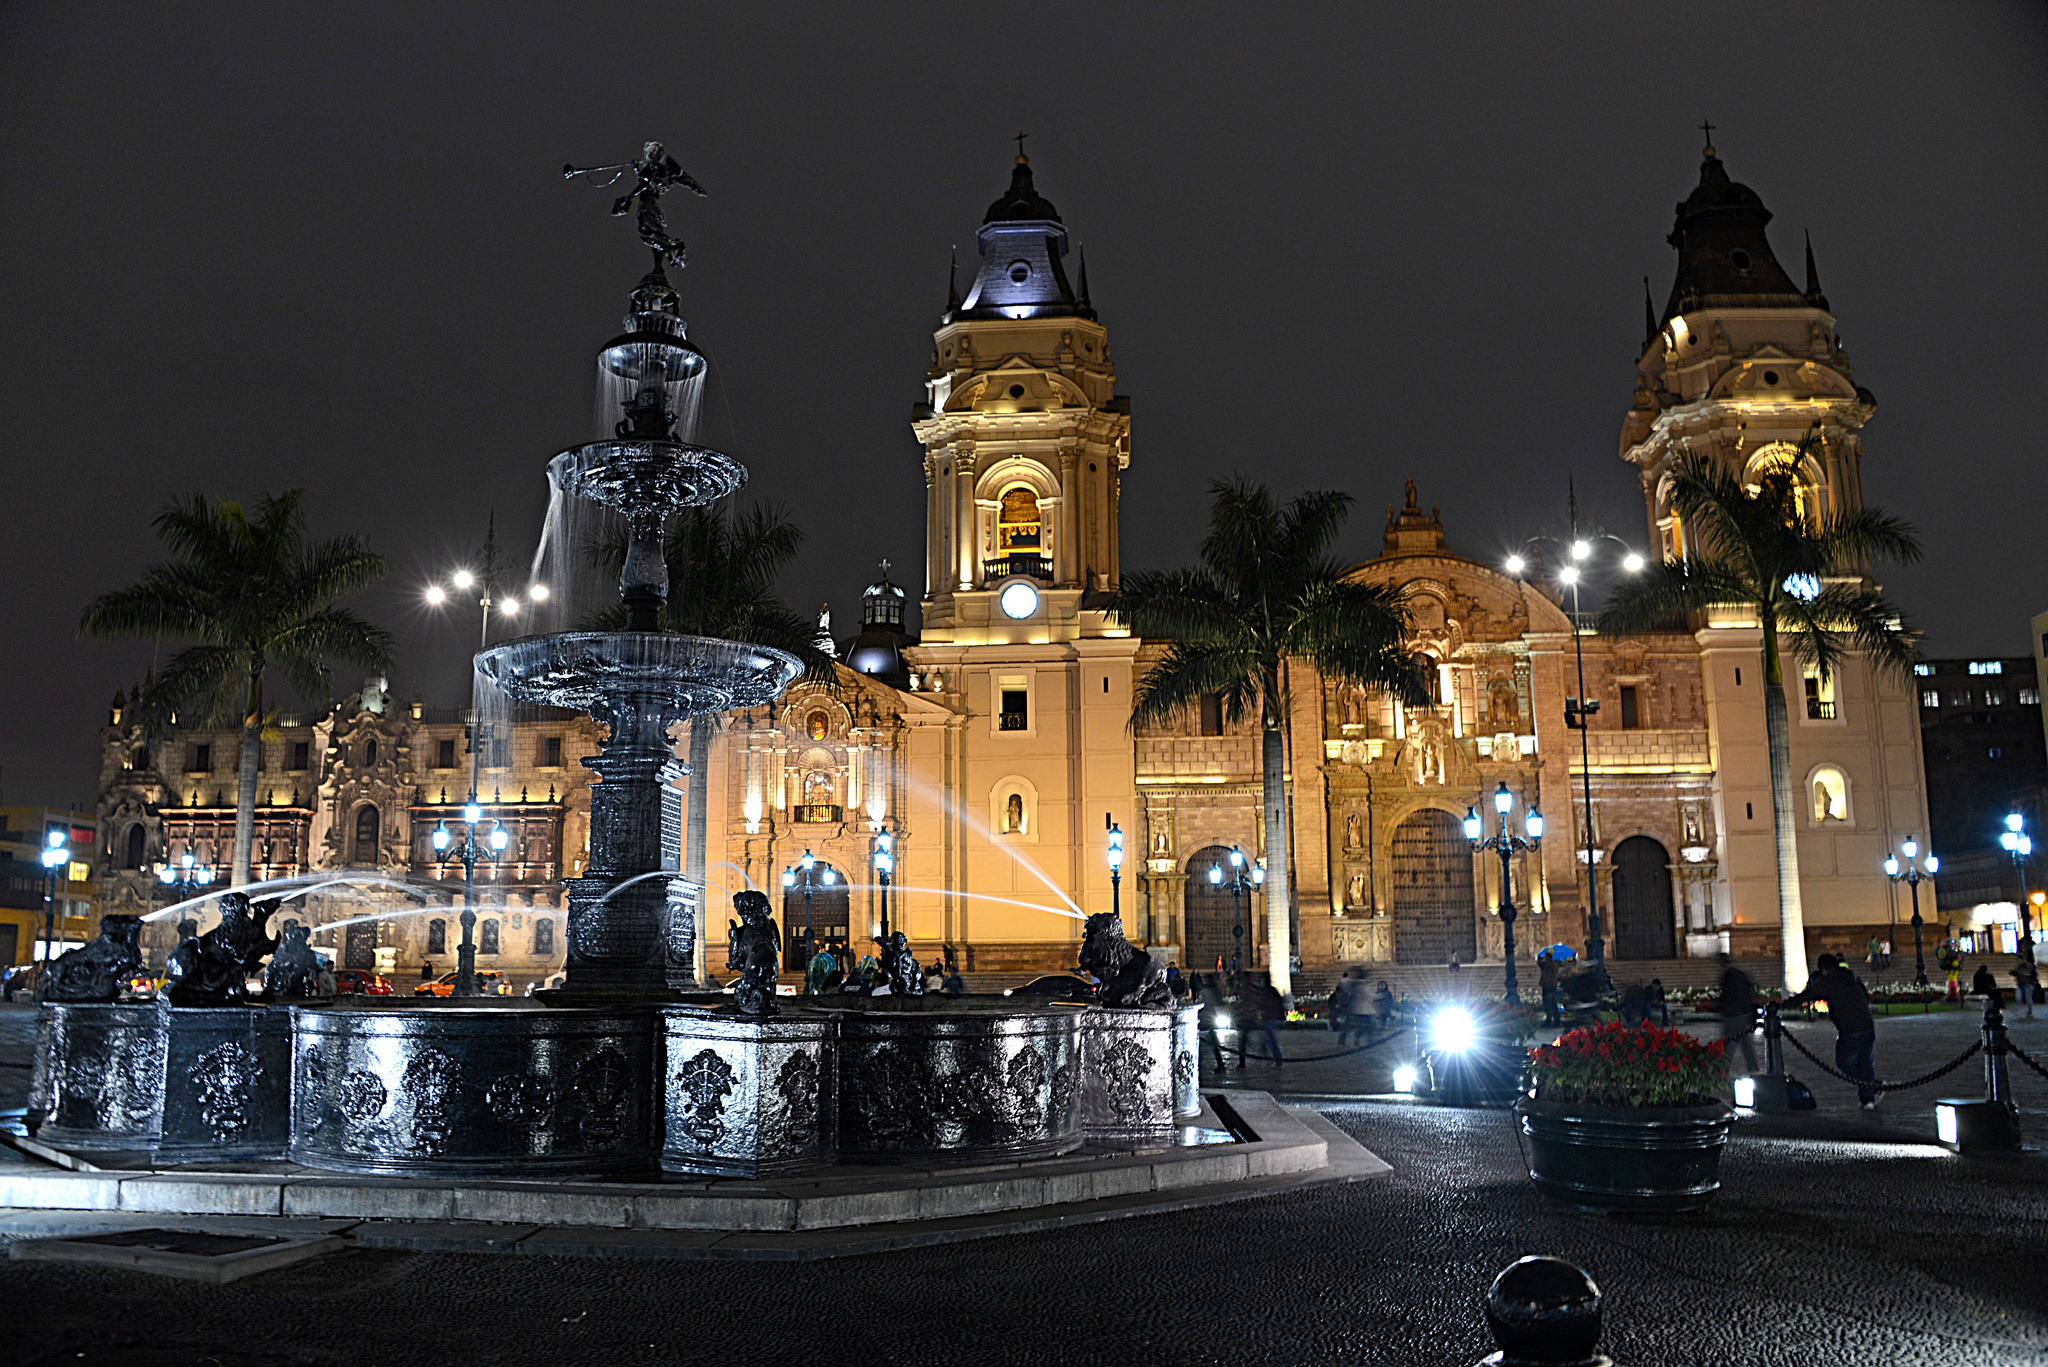 Day 1: LIMA